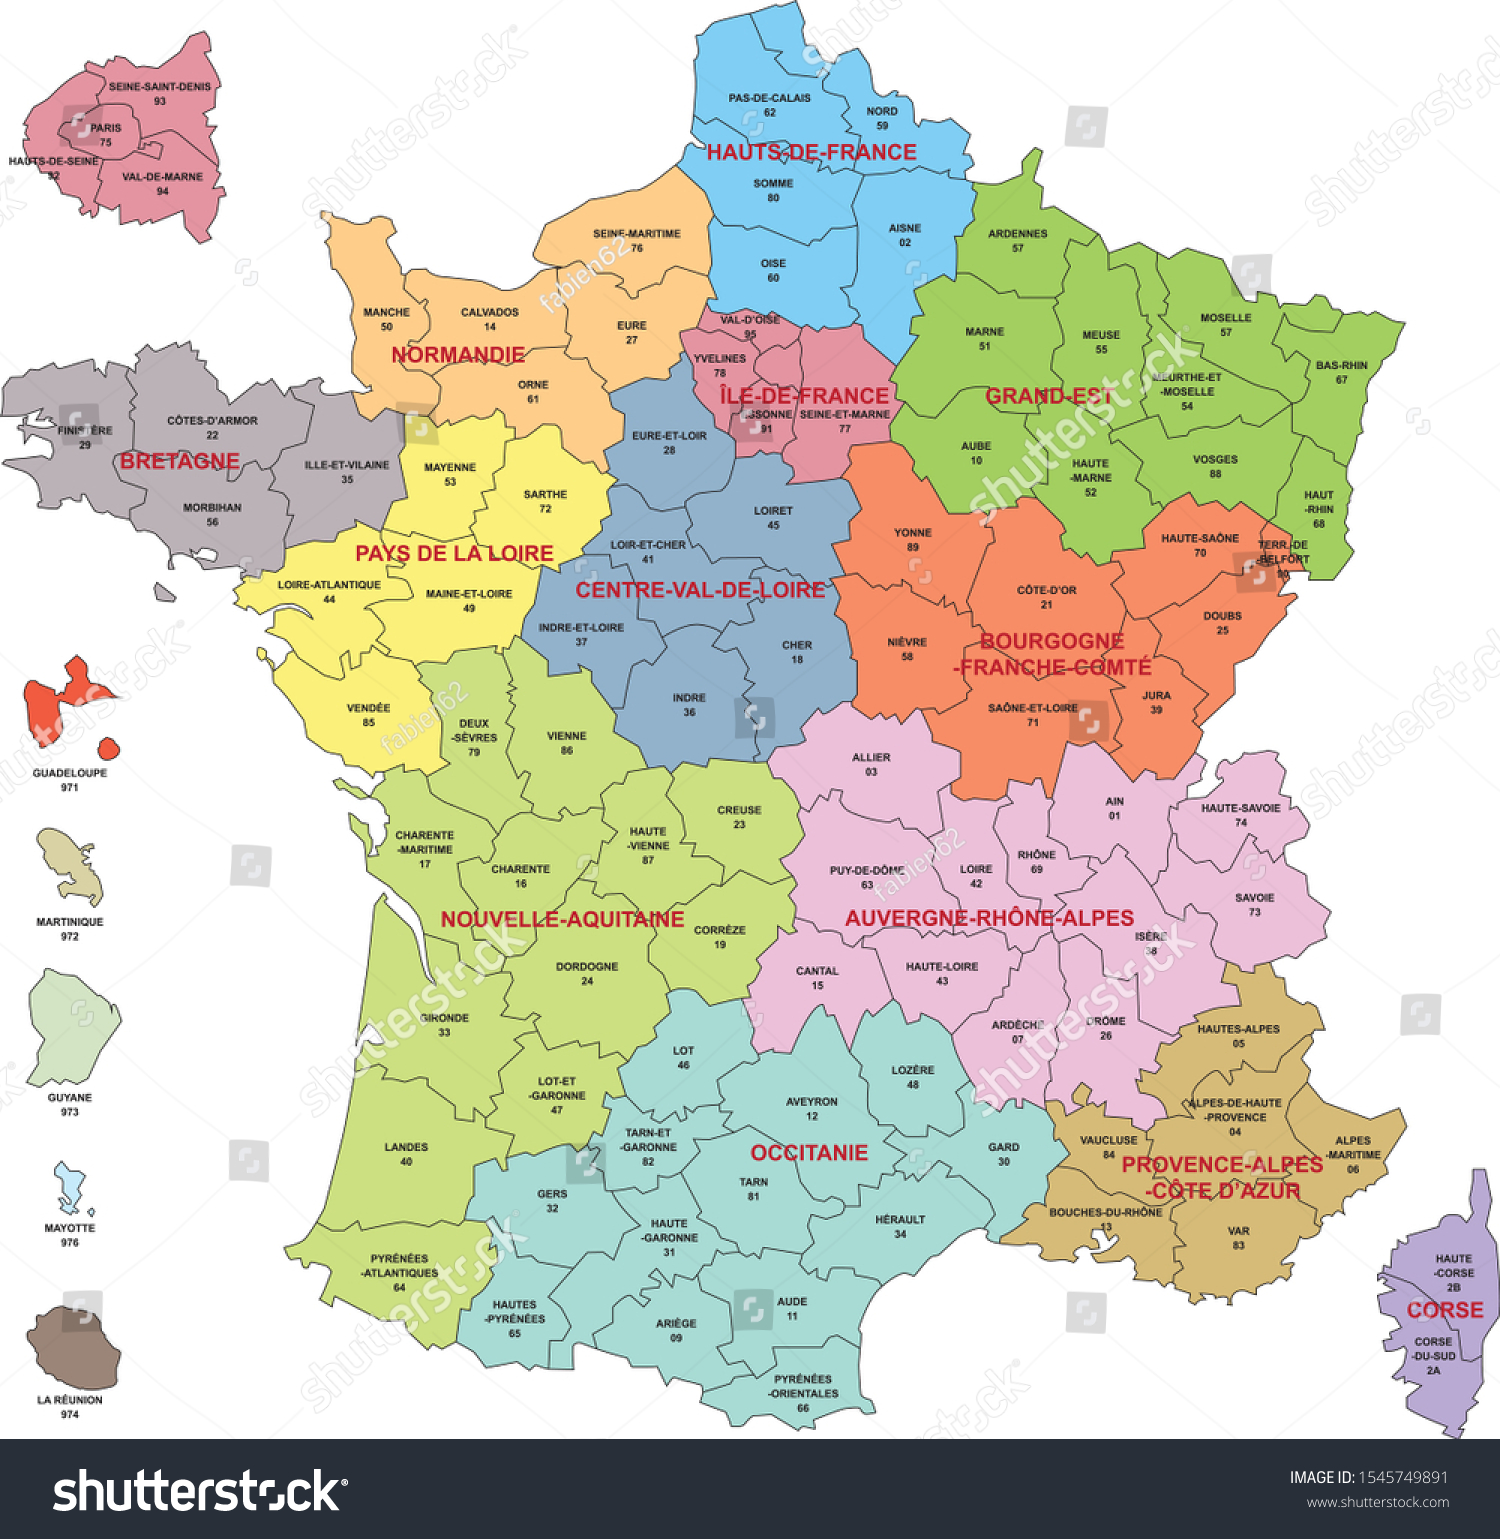 France Departments Map Regions Of France Departments Of France